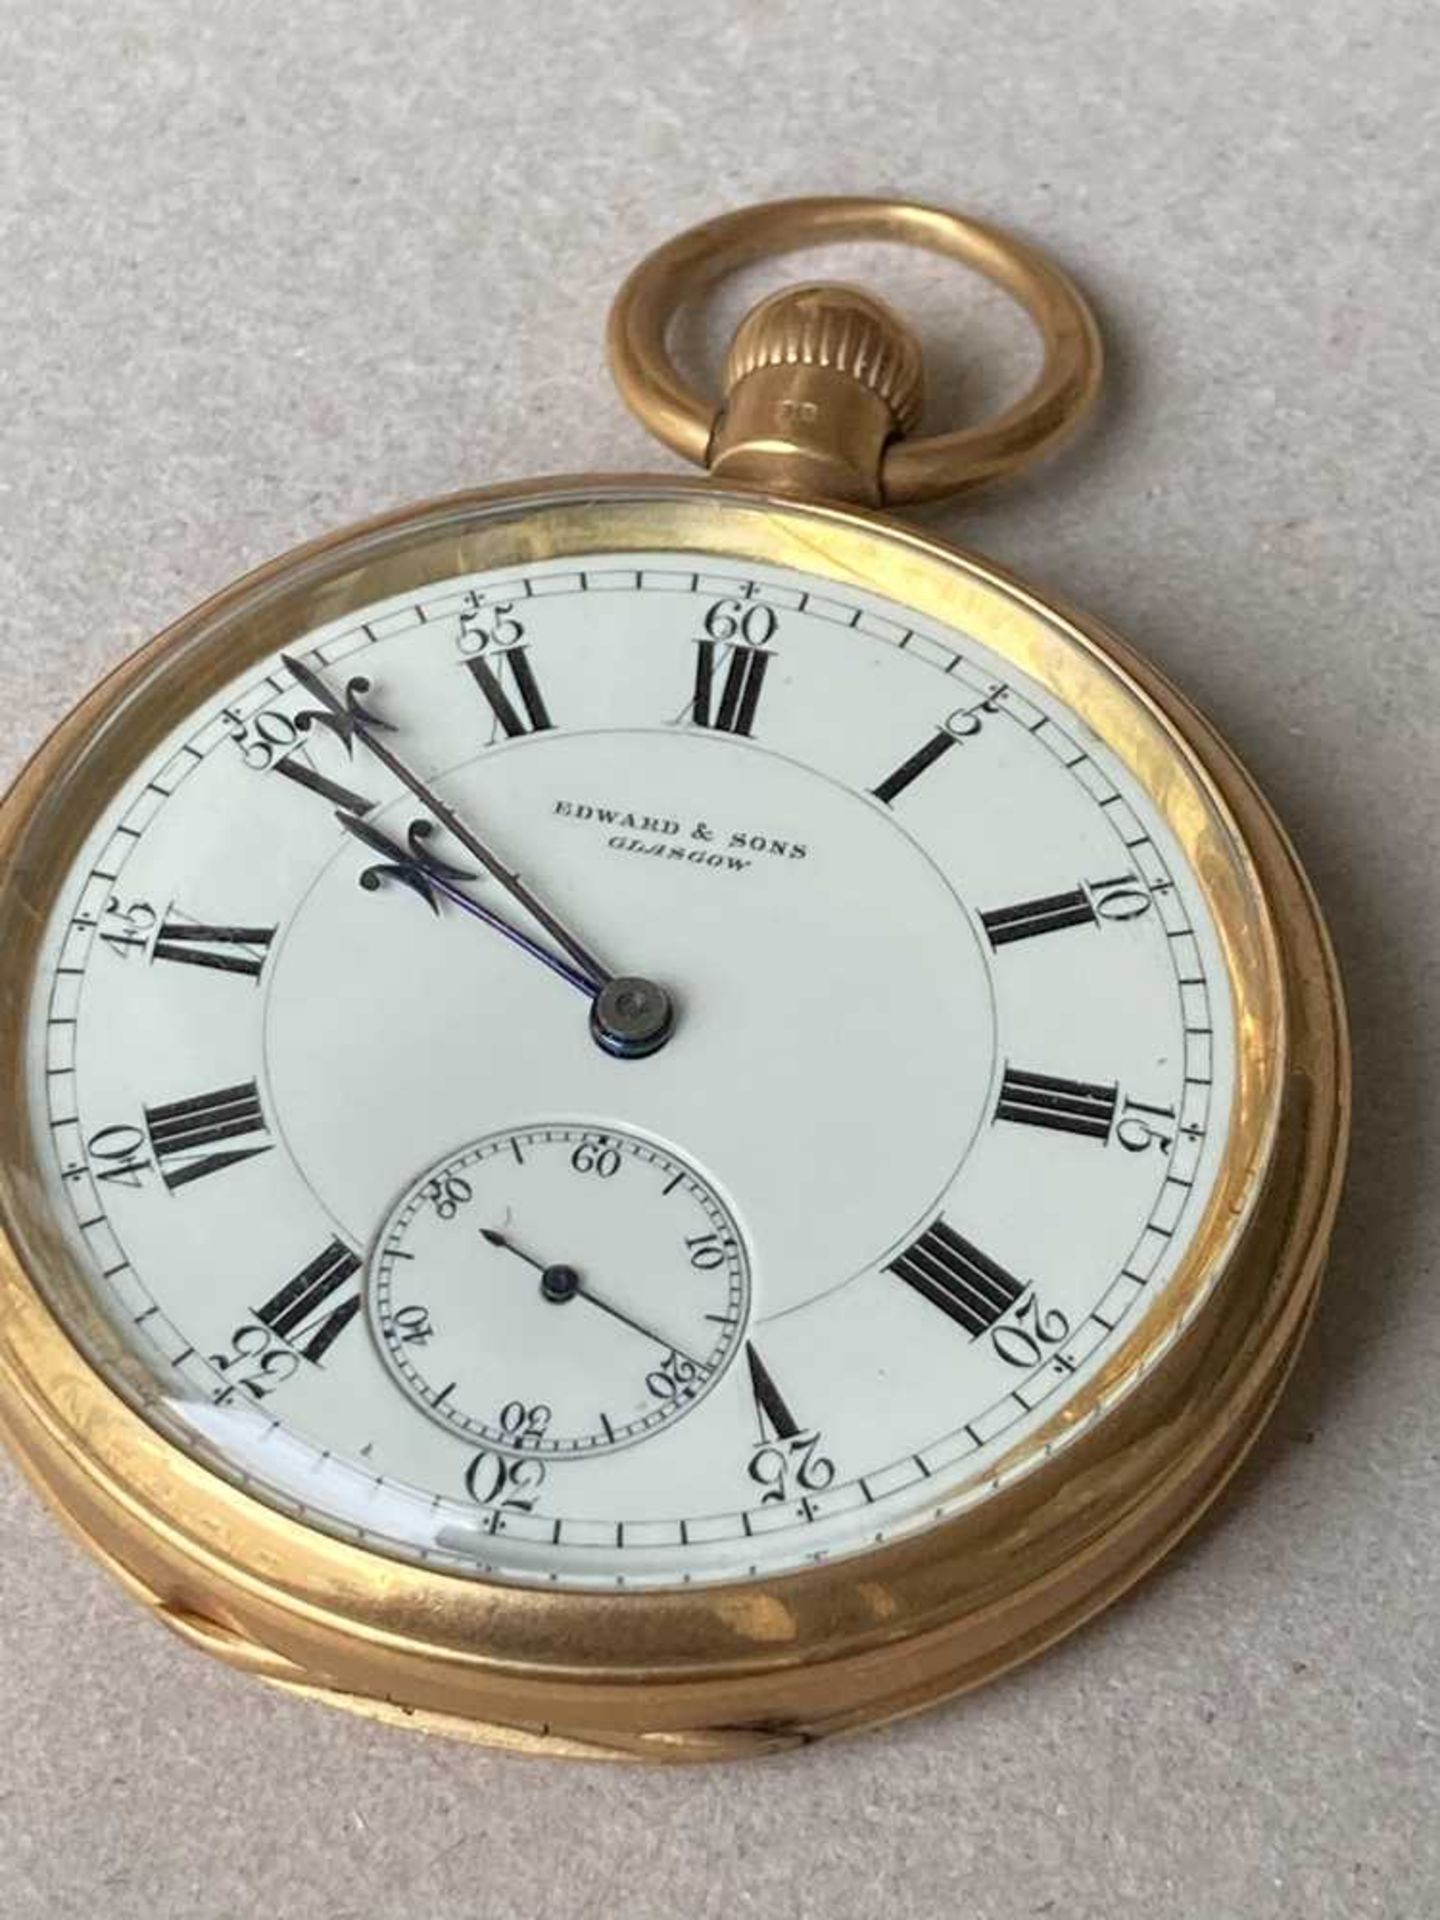 An early 20th century gold pocket watch - Image 6 of 8